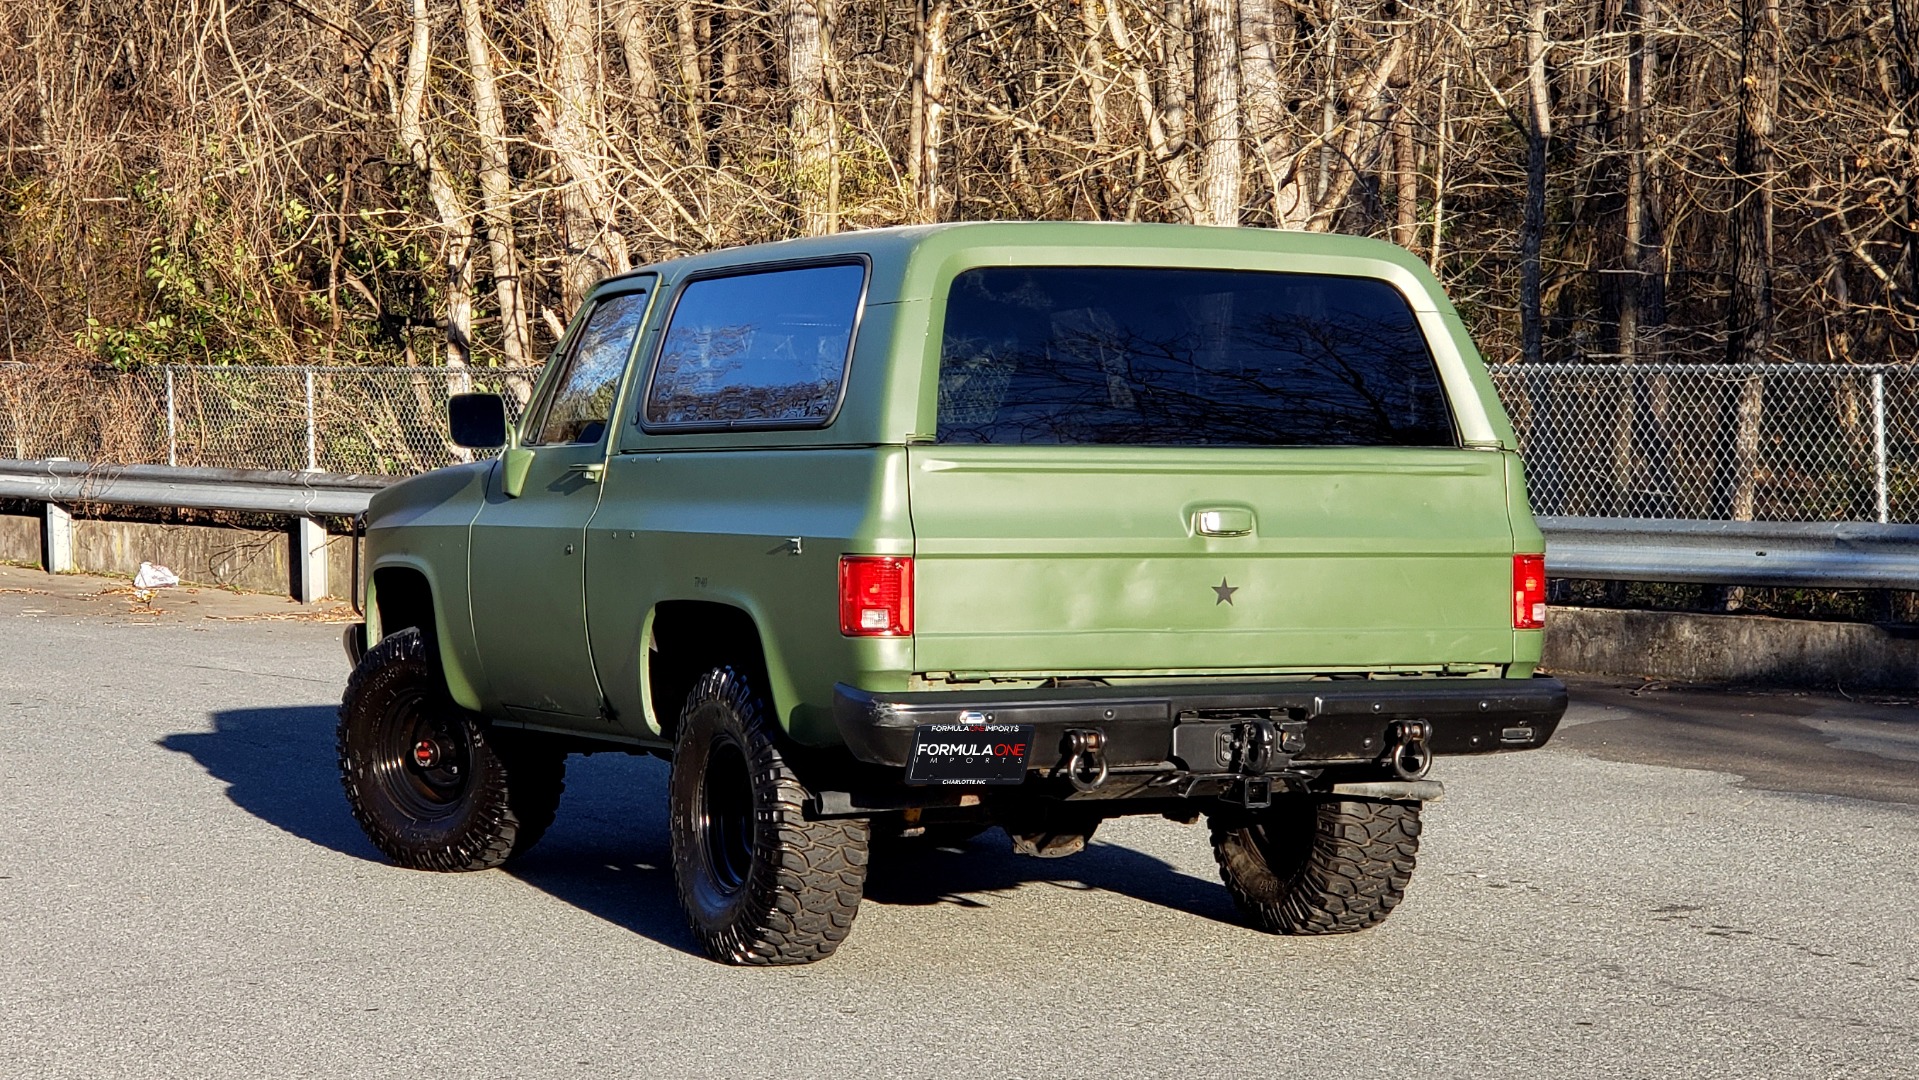 Used 1985 Chevrolet BLAZER D10 MILITARY SUV / 4X4 / 6.2L DIESEL V8 / VINTAGE AIR for sale Sold at Formula Imports in Charlotte NC 28227 4